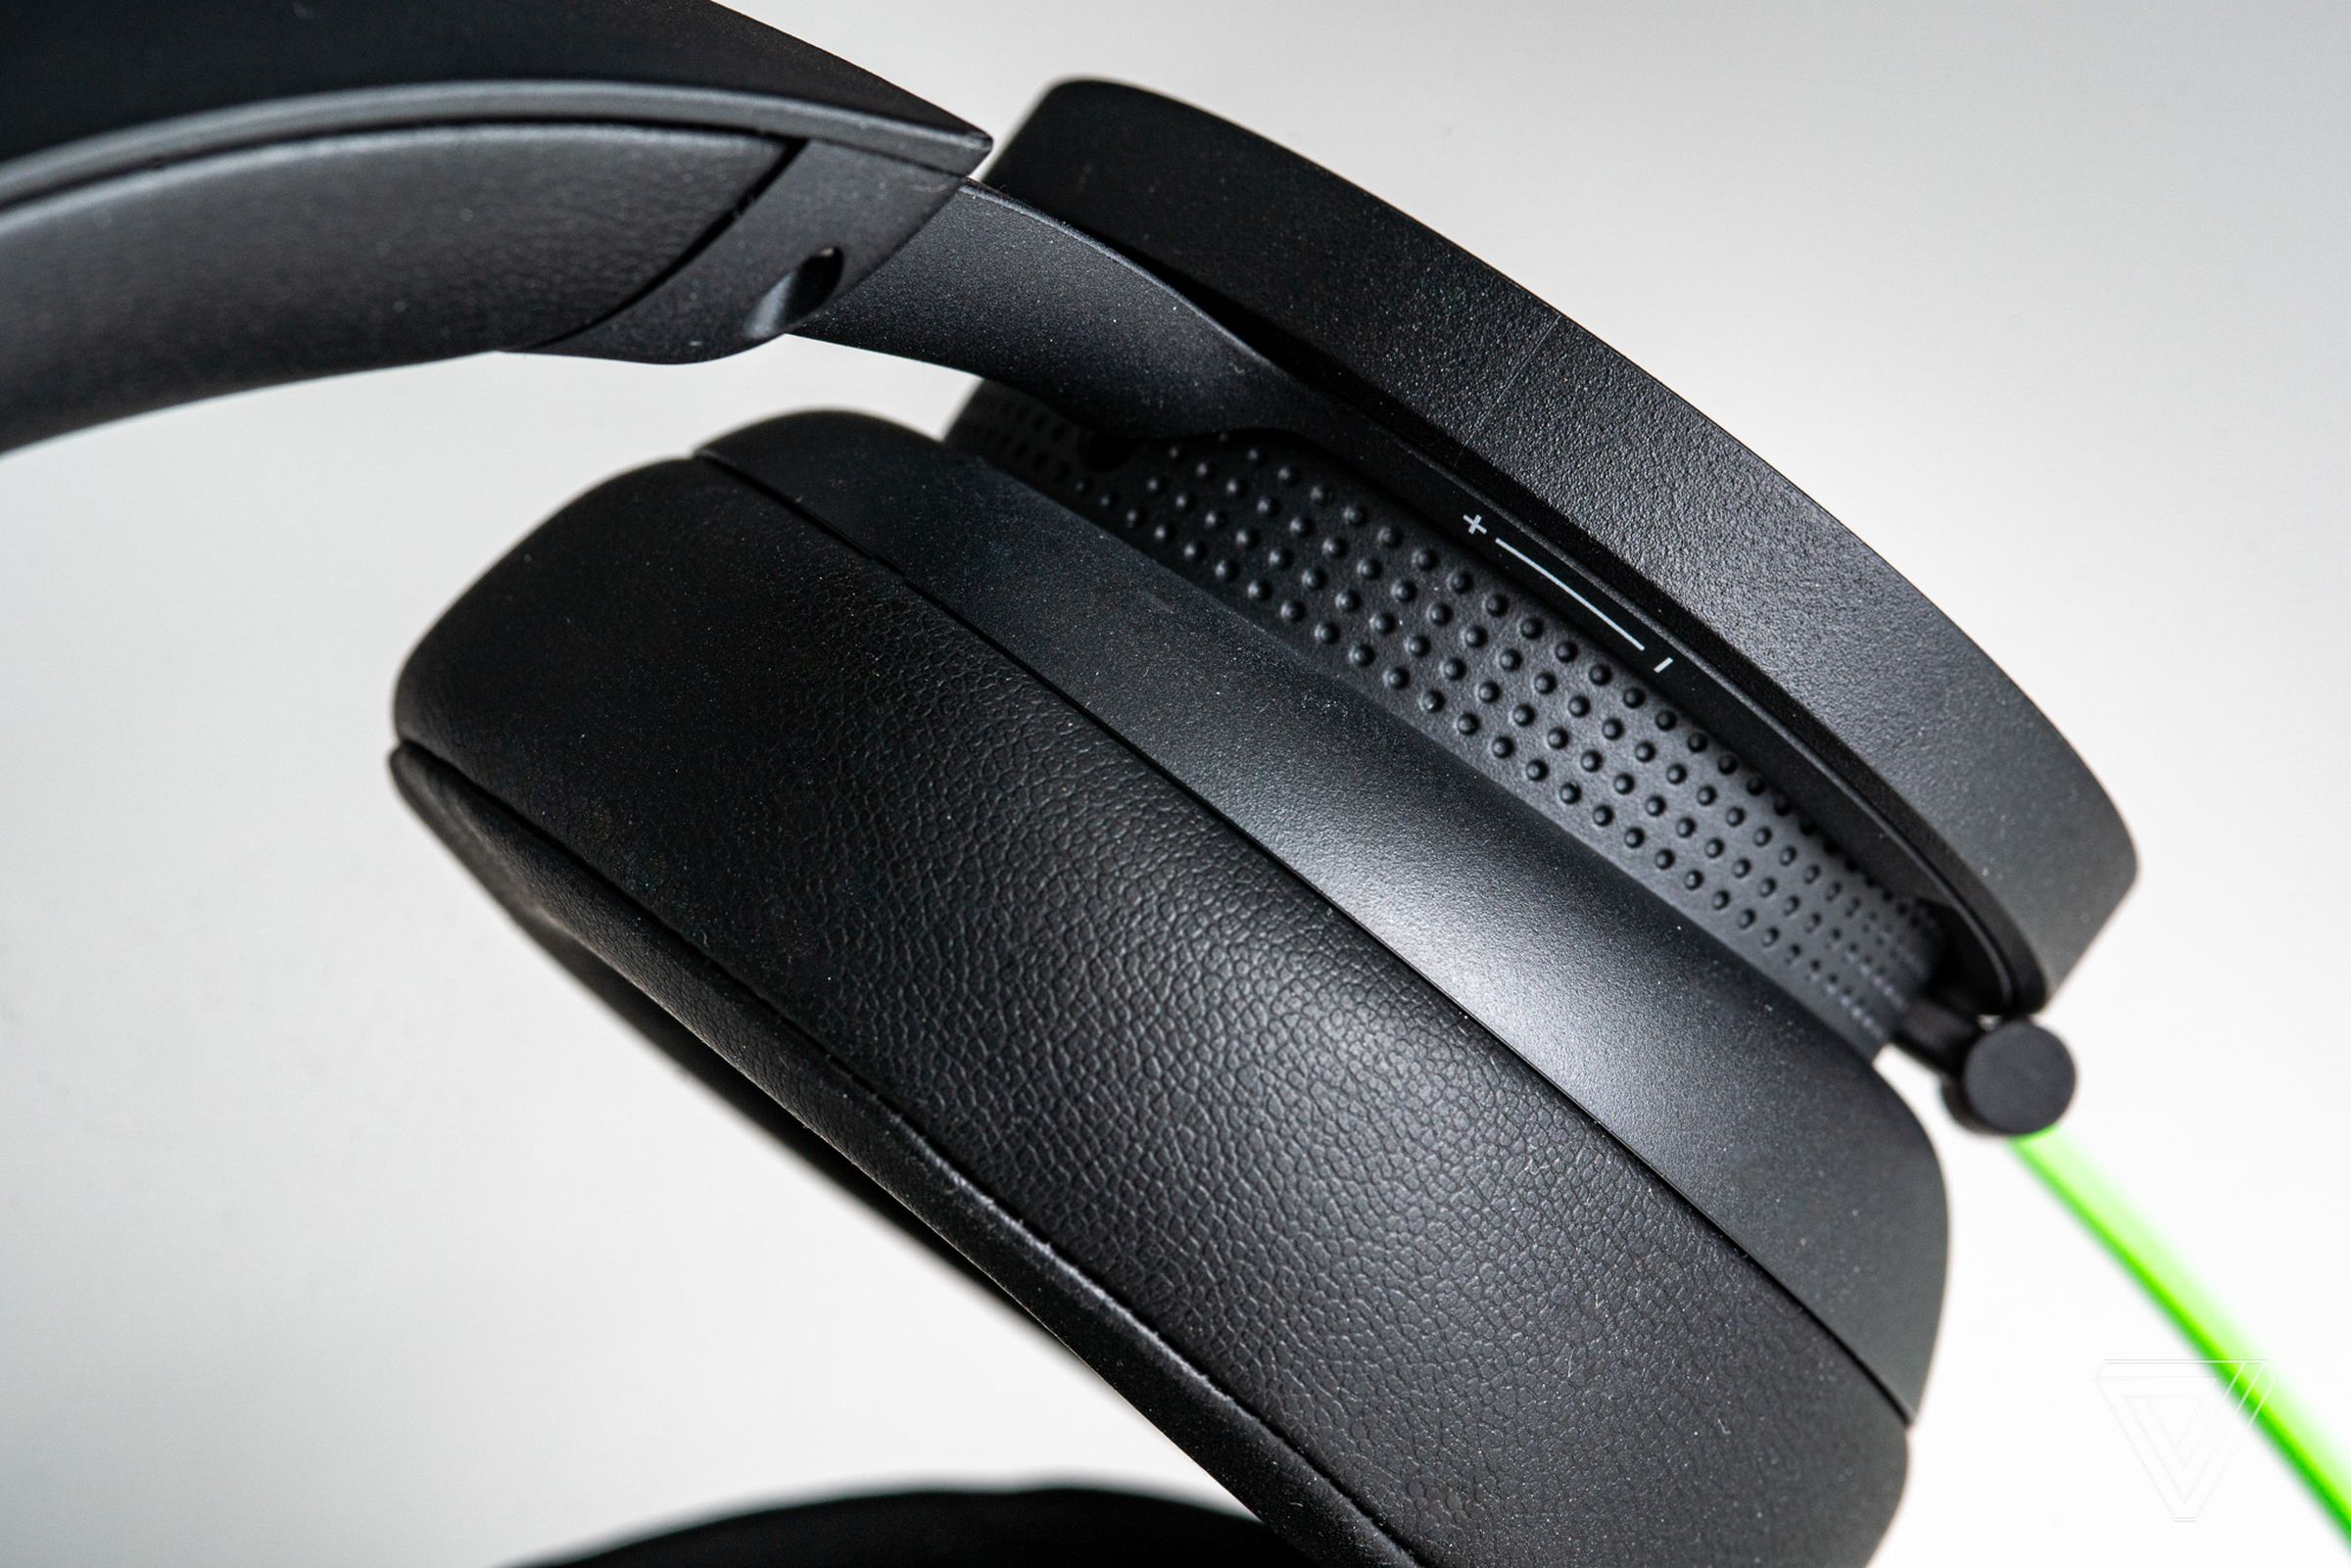 The right earcup controls the headset’s internal volume, so it even works when plugged into non-Xbox devices.